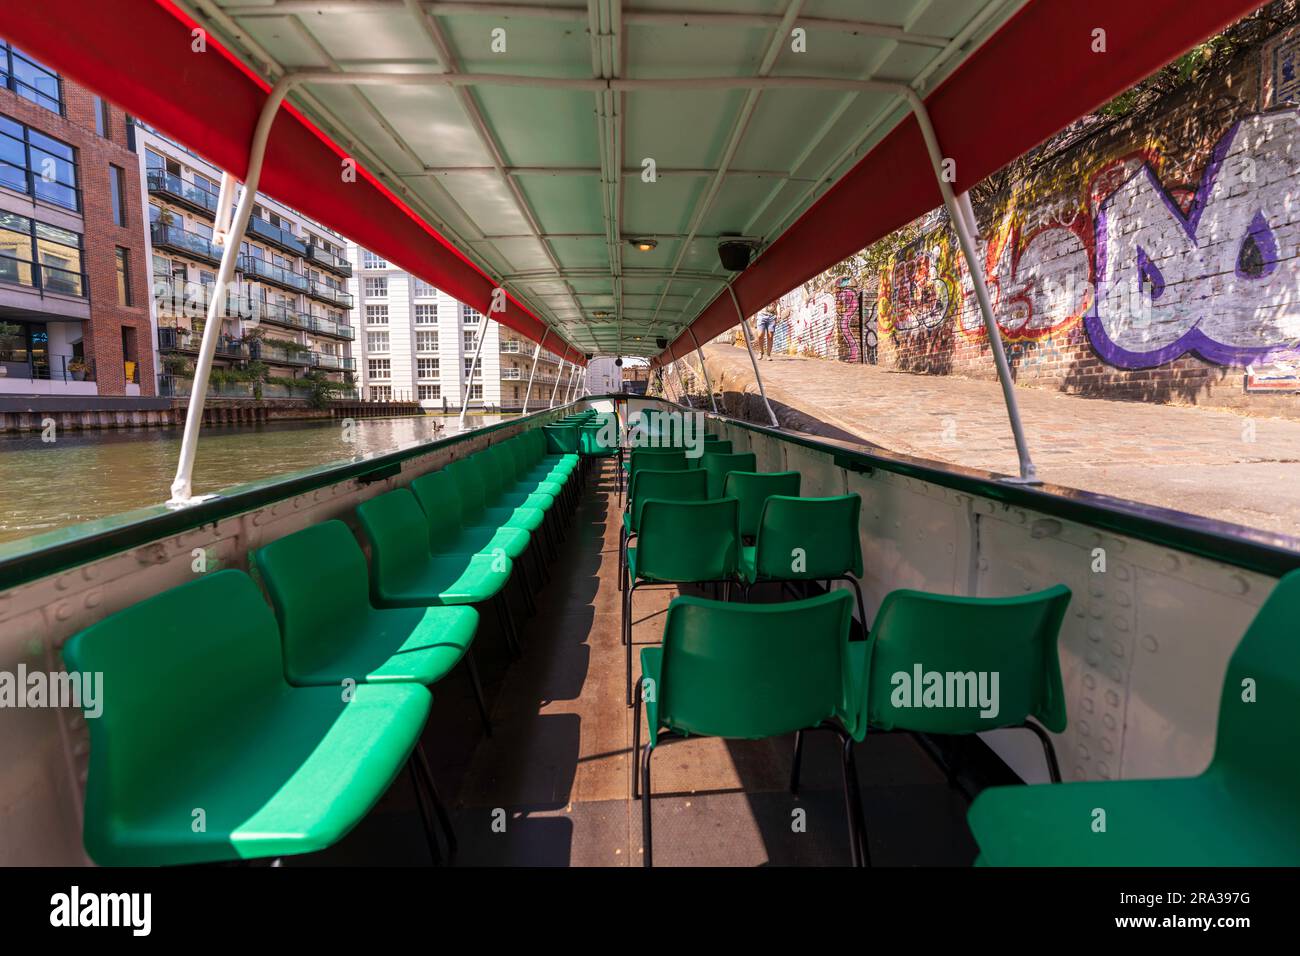 Inside a historic canal boat, a Peaky Blinders boat which is also known as a narrowboat. Take a boat tour on a London canal. Regent's Canal is perfect Stock Photo